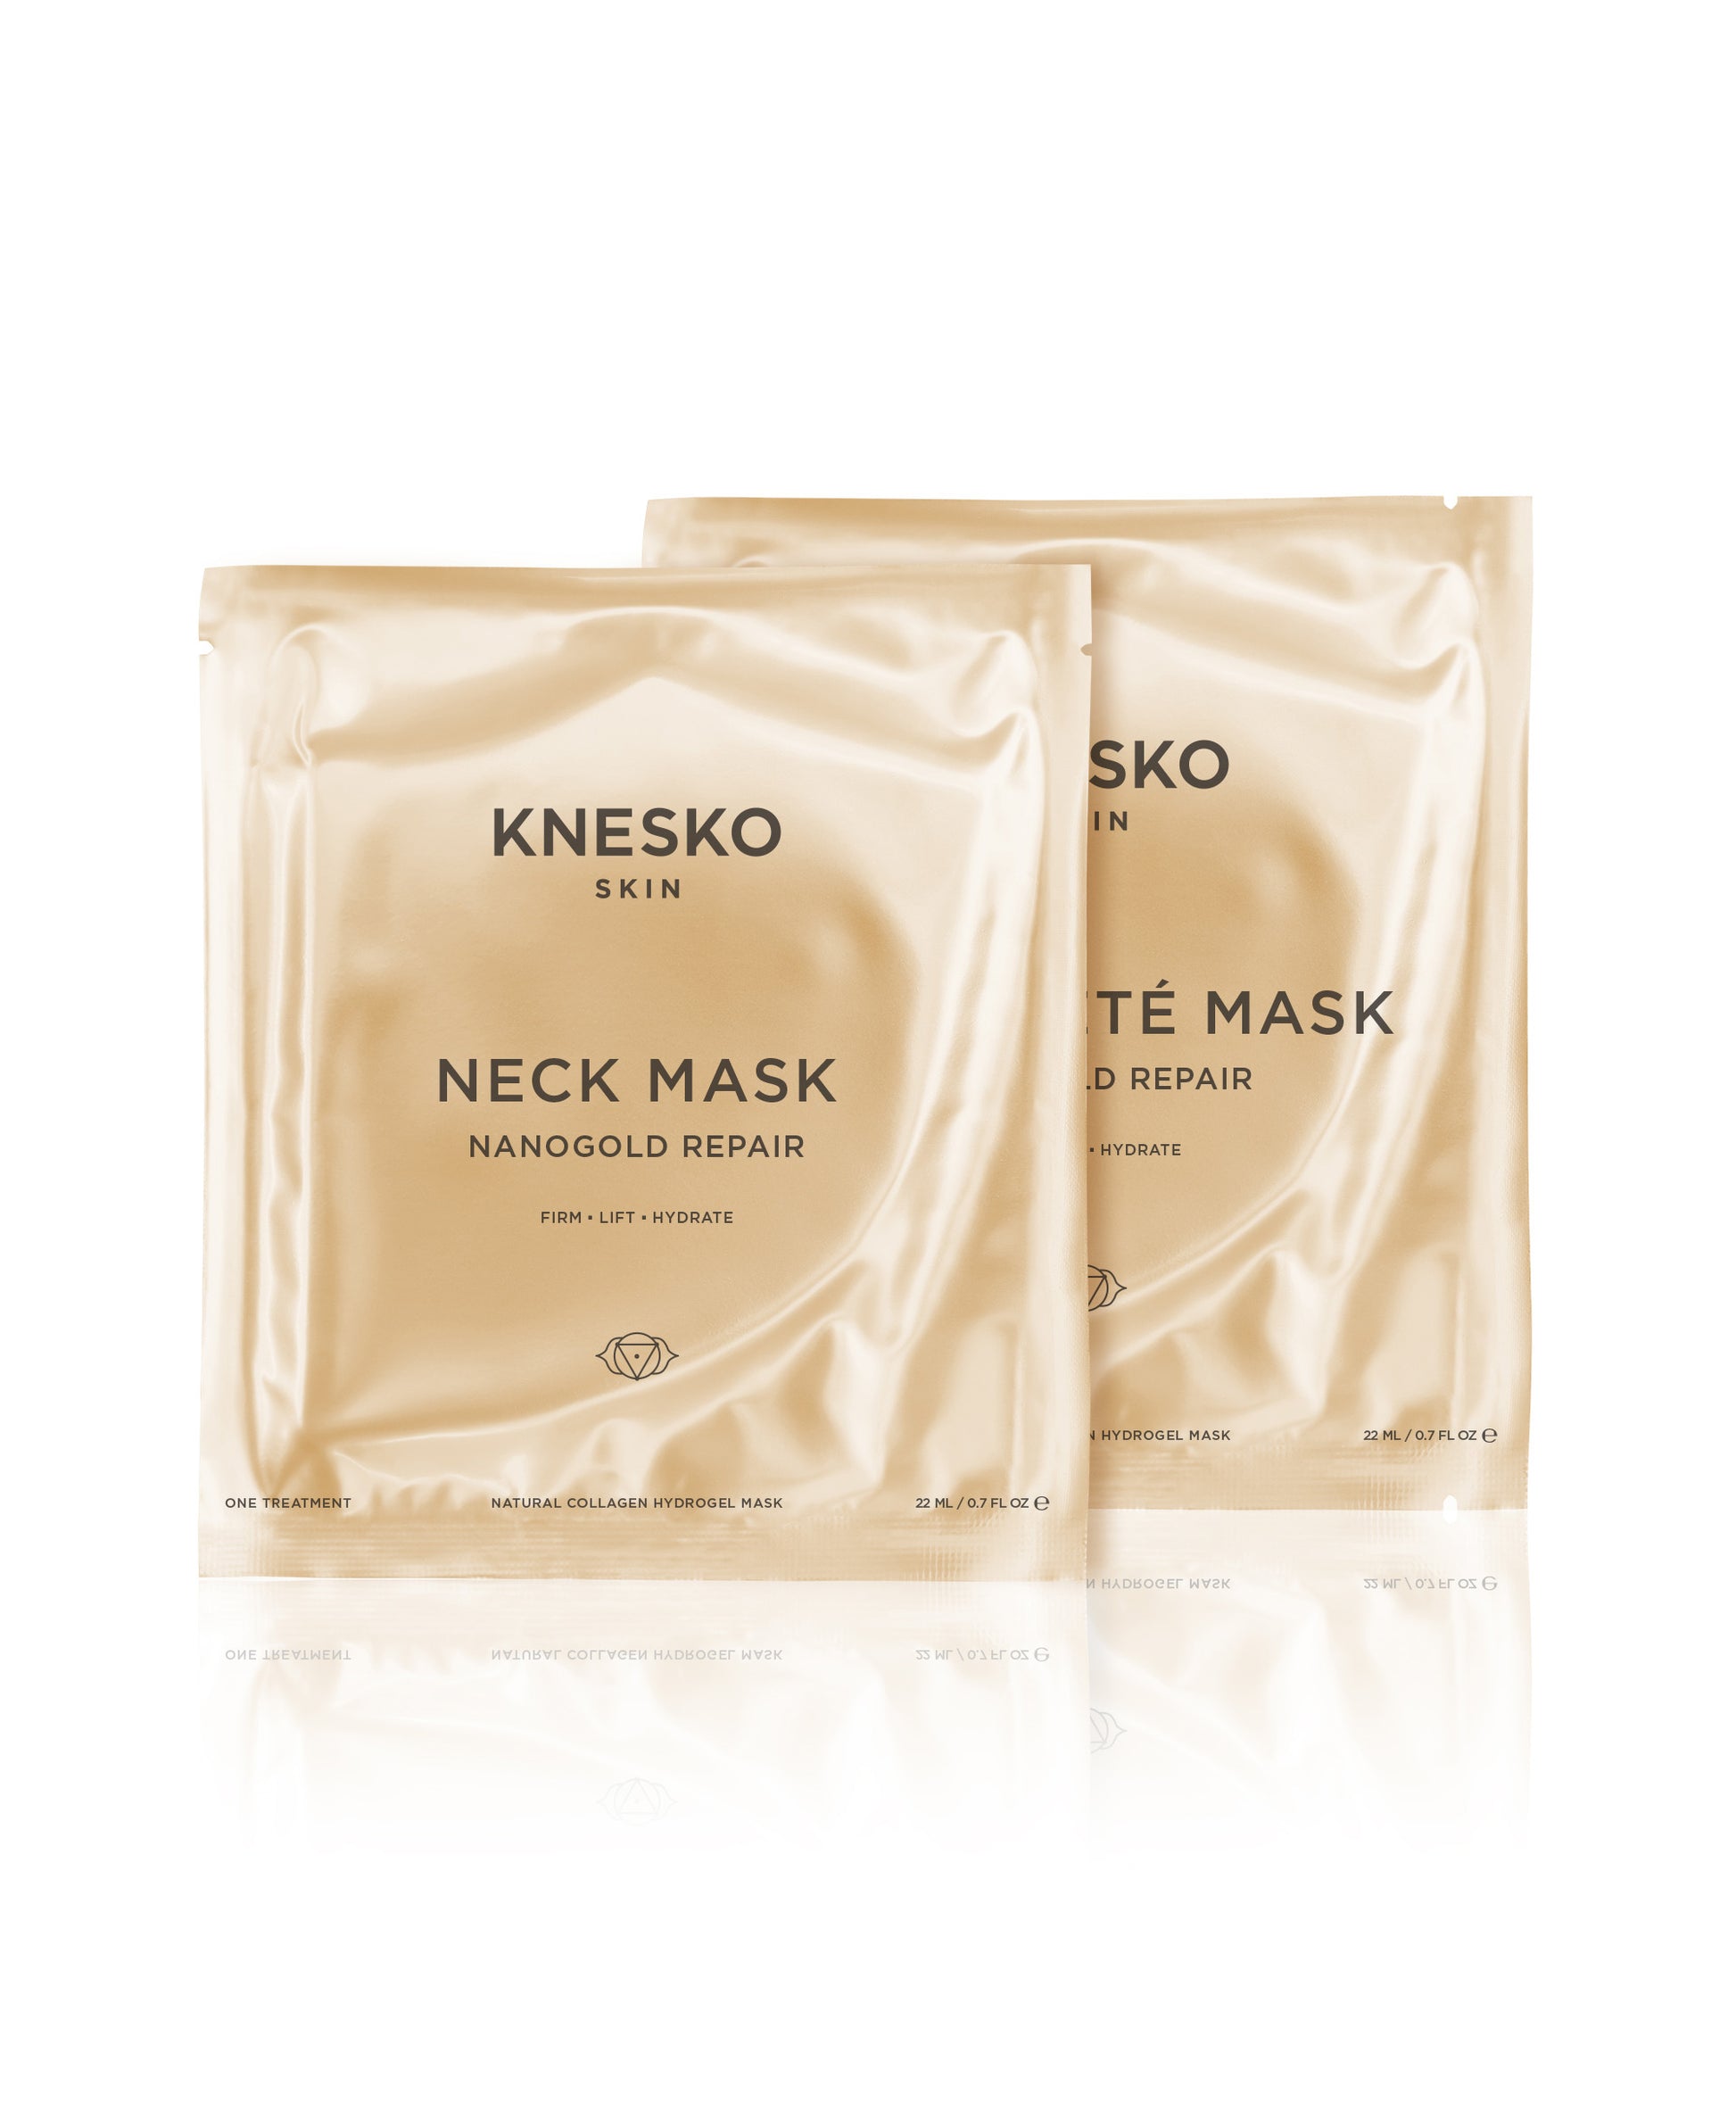 Nano Gold Repair Neck and Decollete Mask packaging.